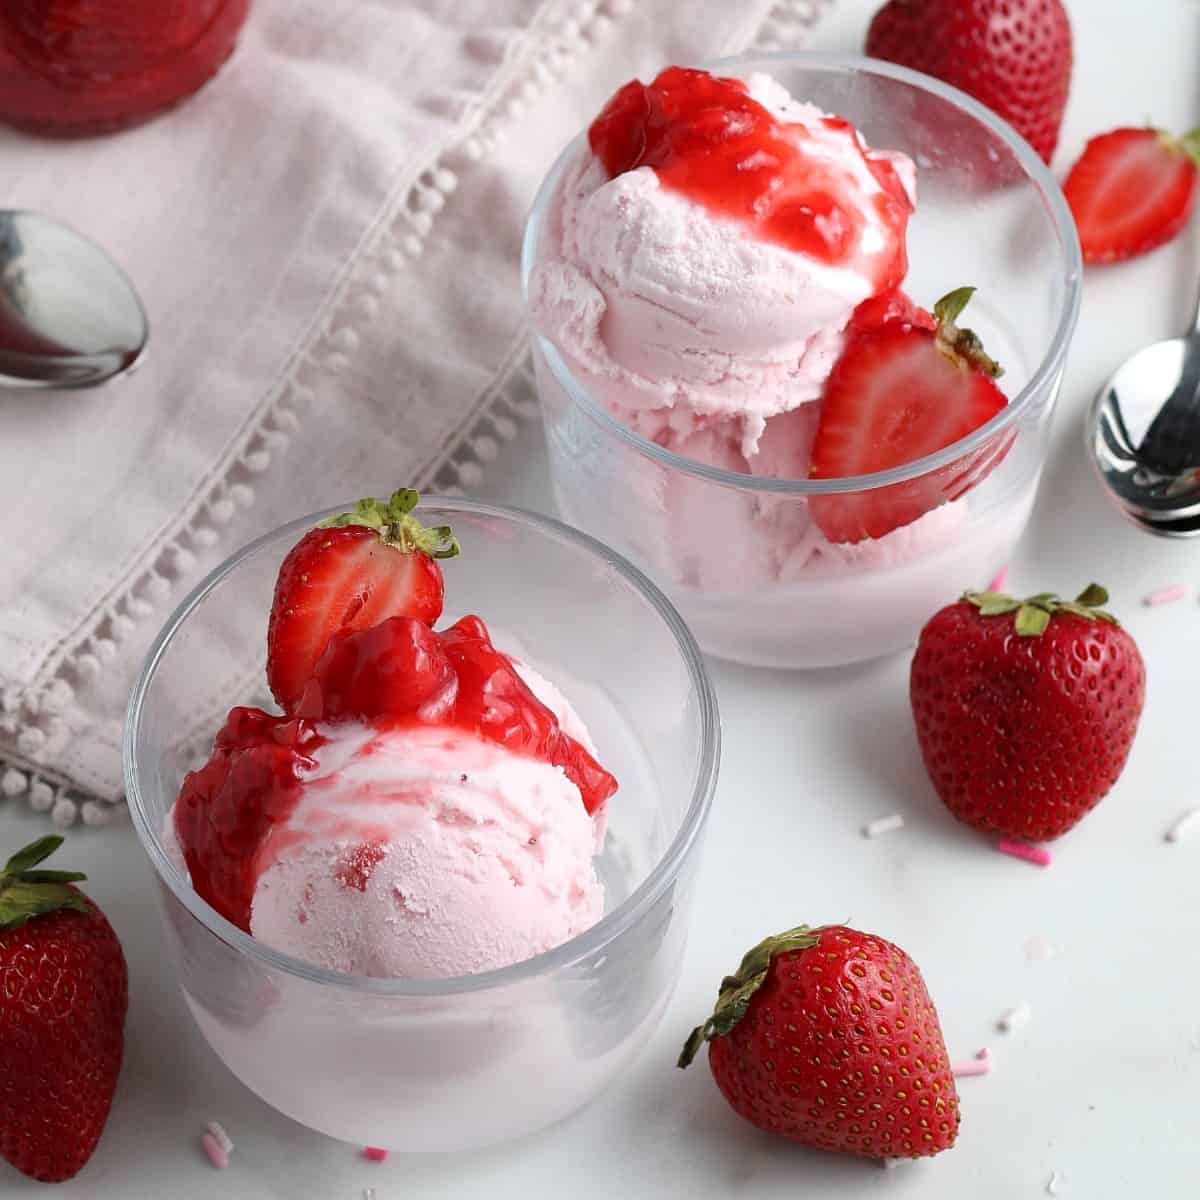 Strawberry dairy free ice cream is topped with fruit topping.